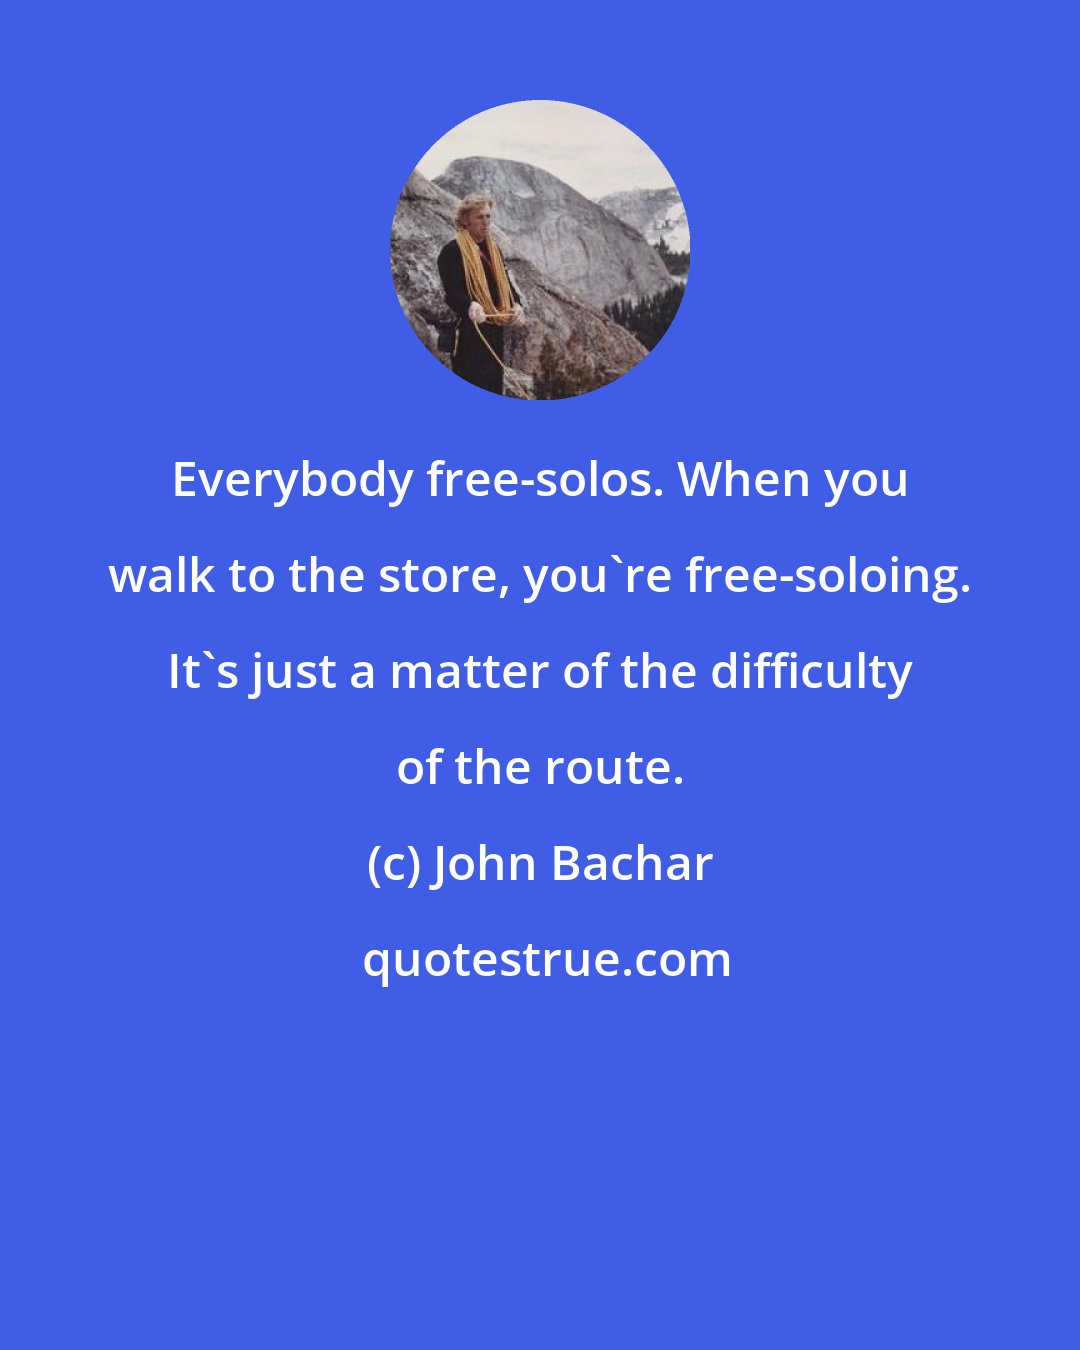 John Bachar: Everybody free-solos. When you walk to the store, you're free-soloing. It's just a matter of the difficulty of the route.